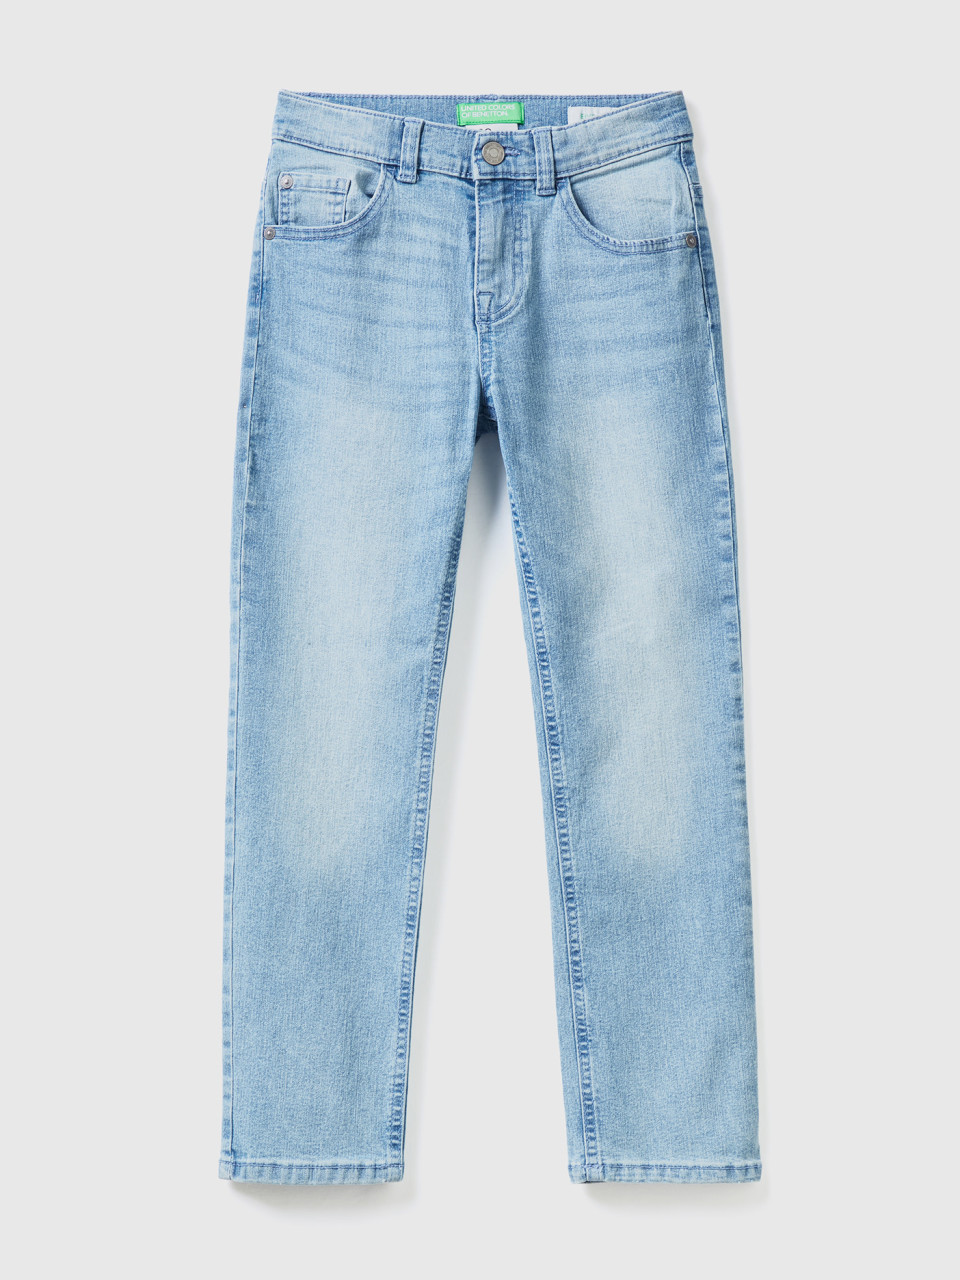 Benetton, eco-recycle Slim Fit Jeans, Sky Blue, Kids